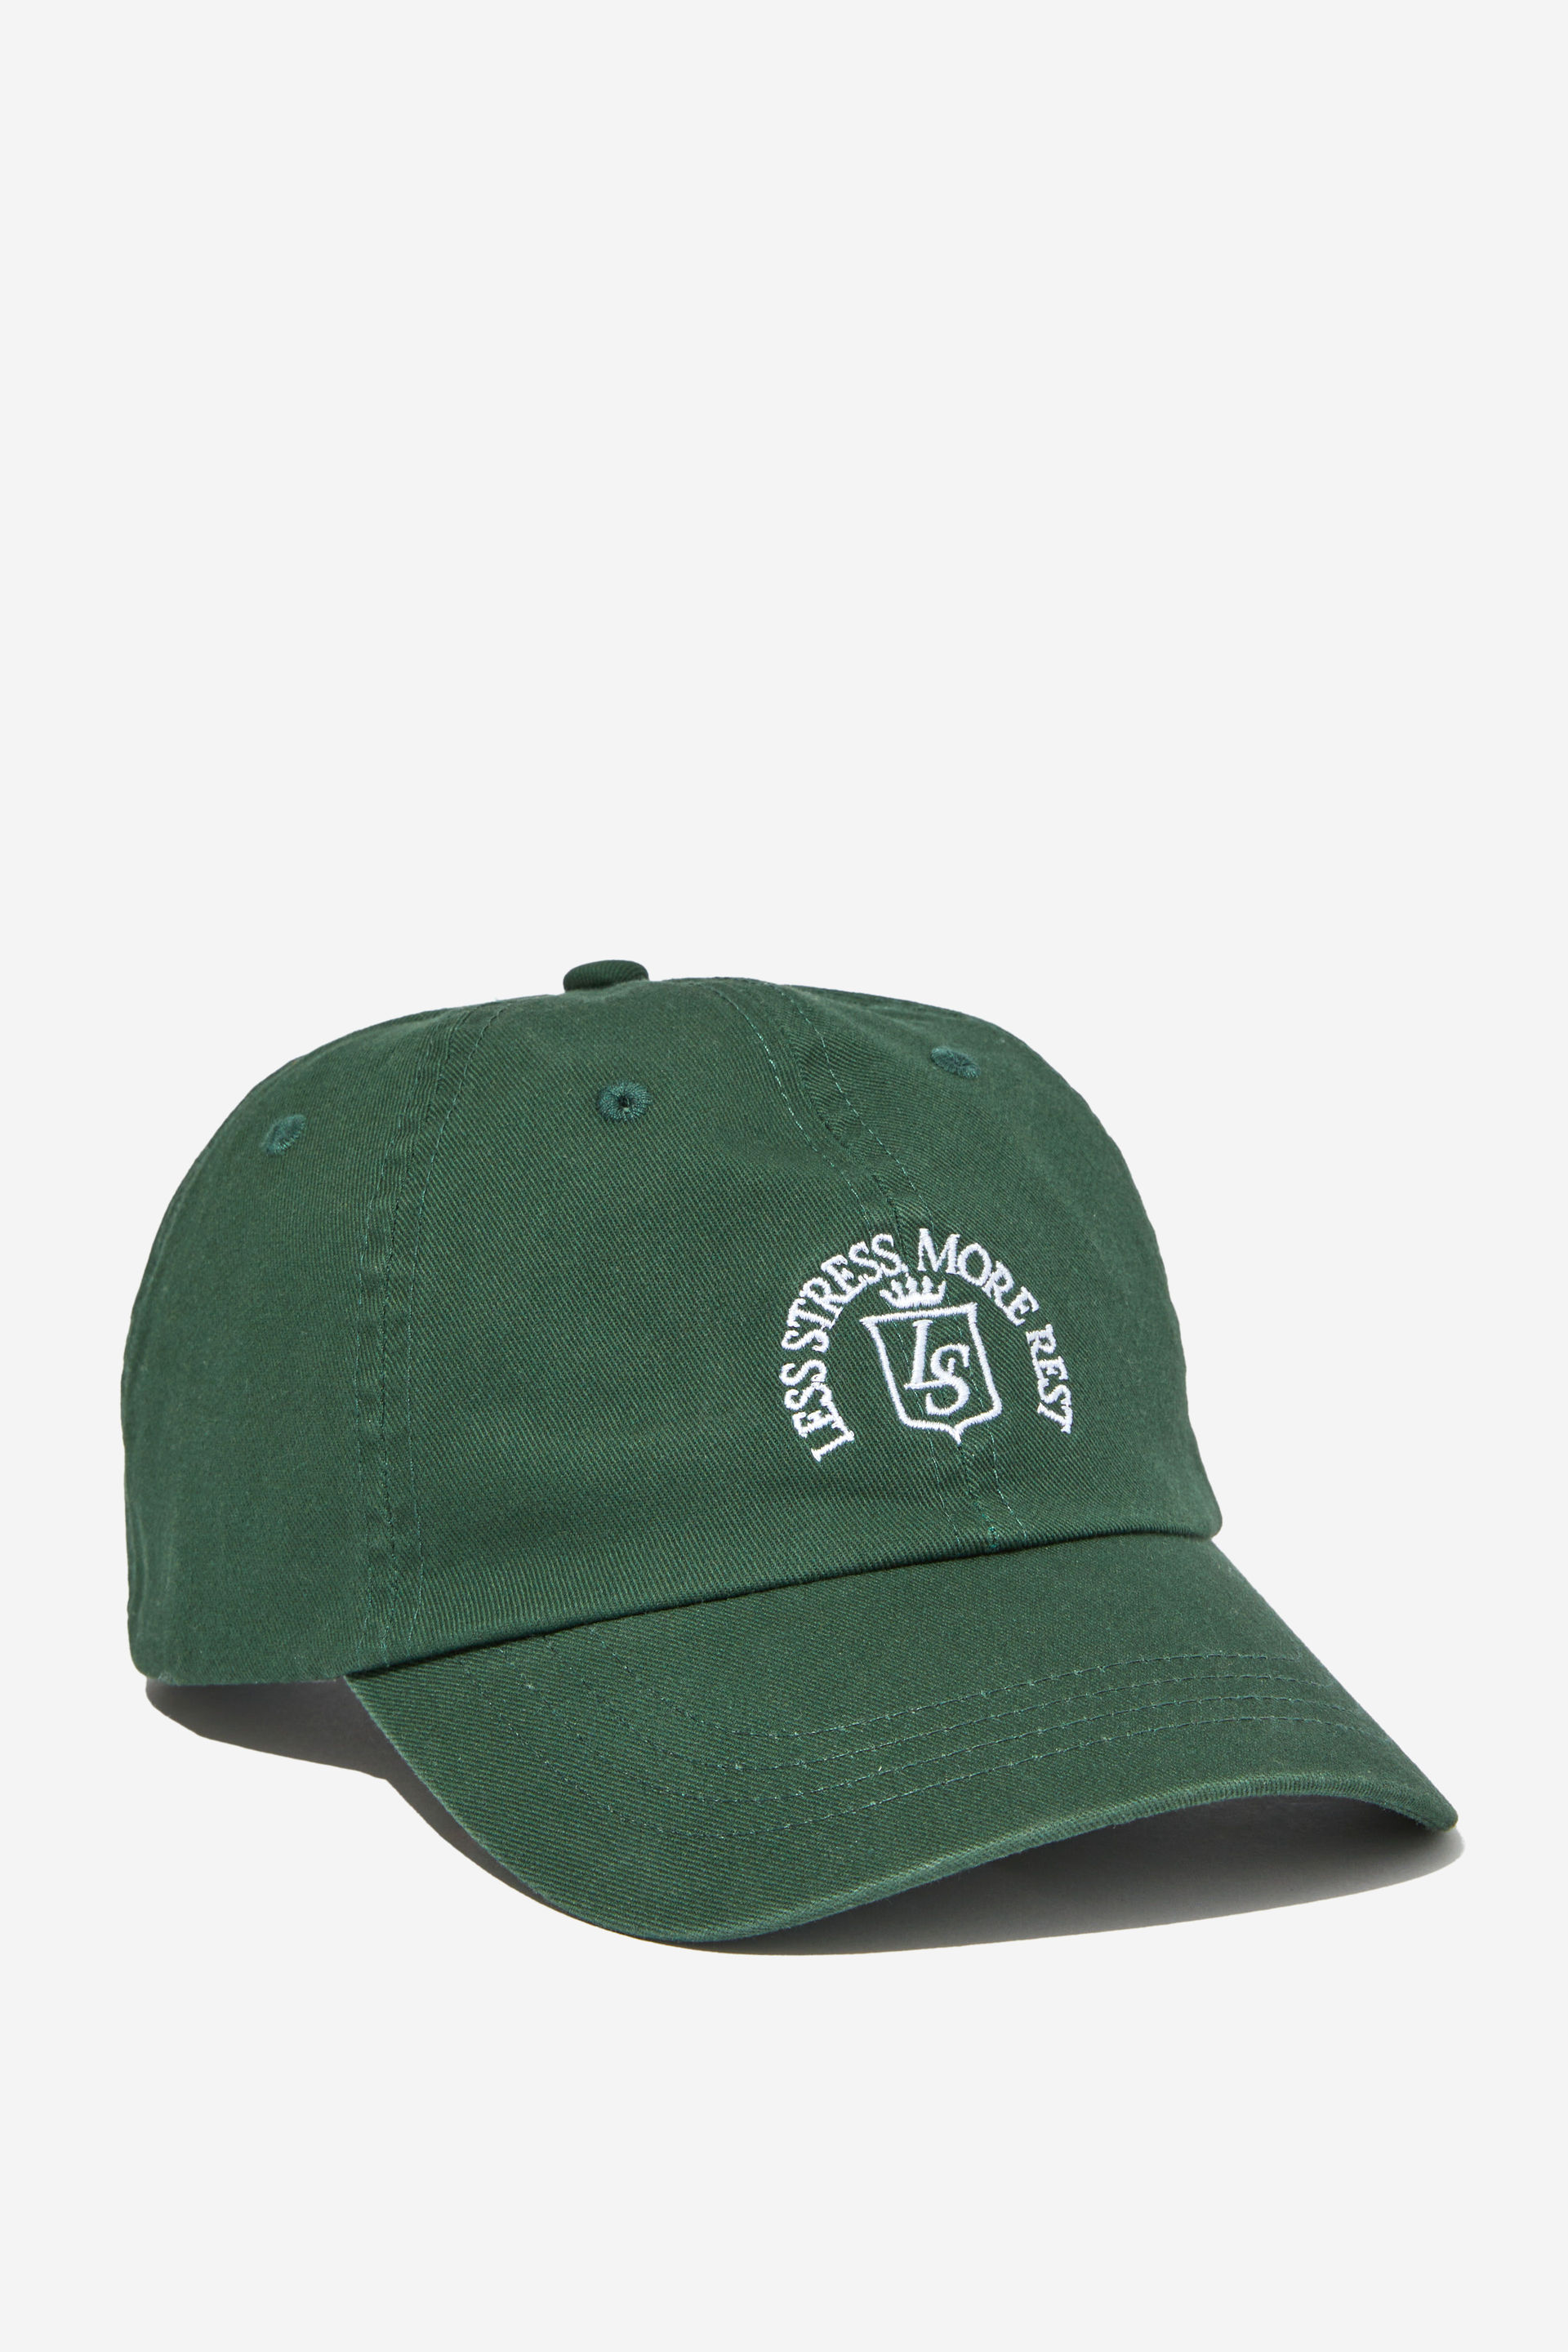 Typo - Just Another Dad Cap - Less stress more rest club green